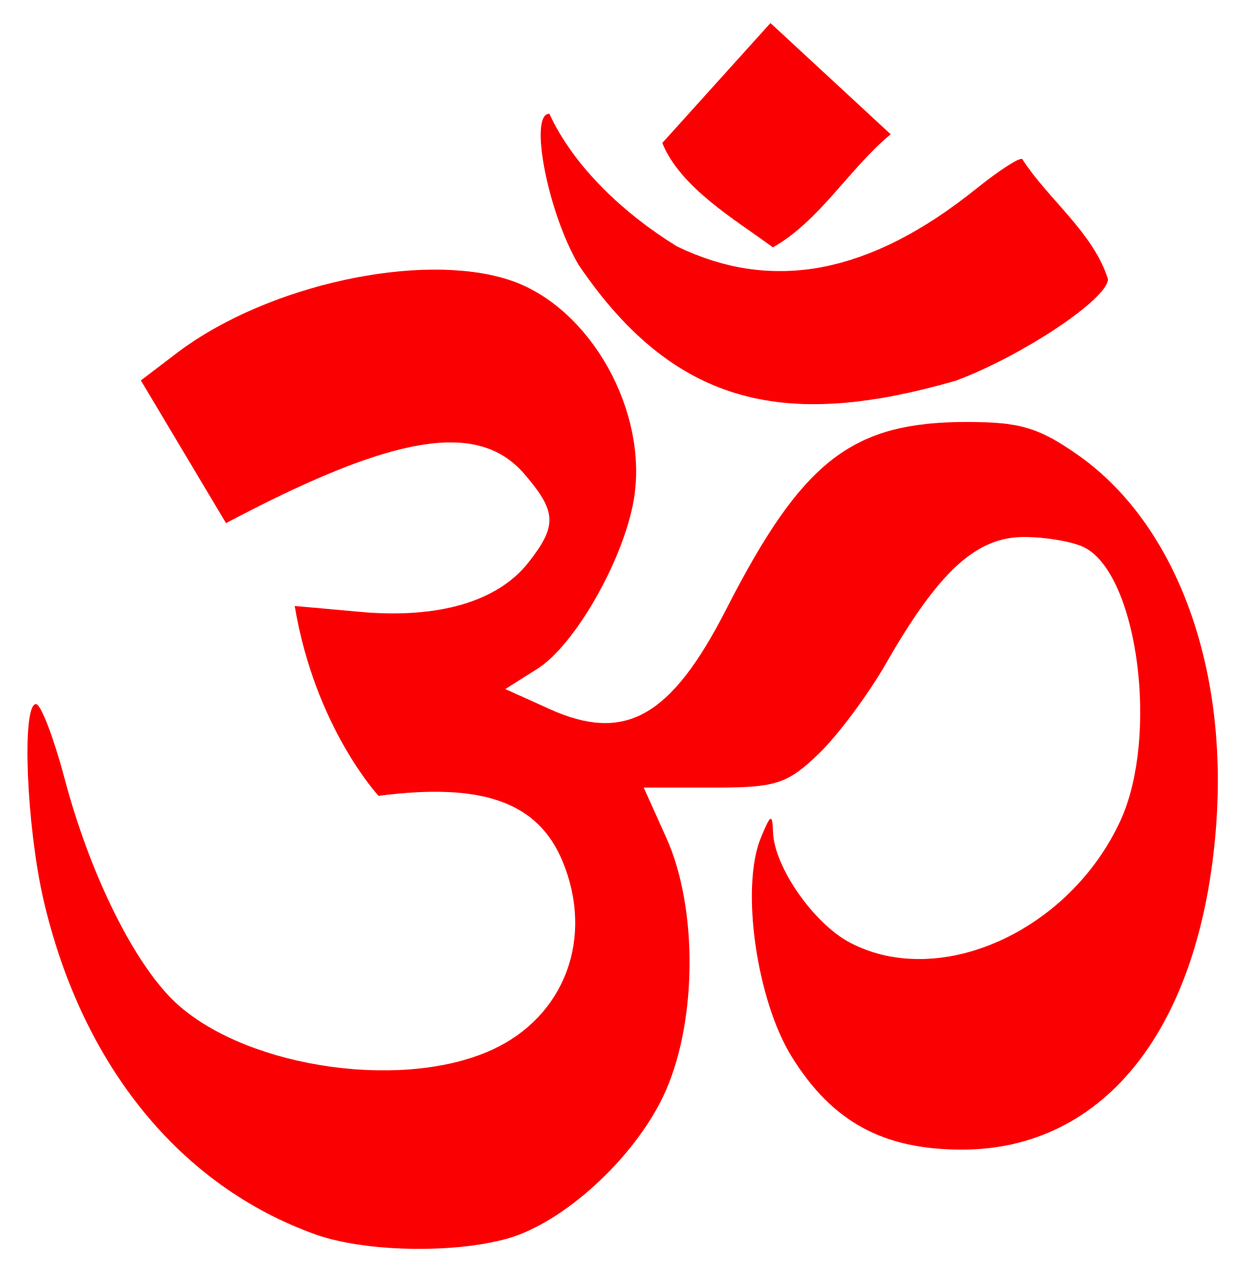 mantra om at m sacred syllable free photo